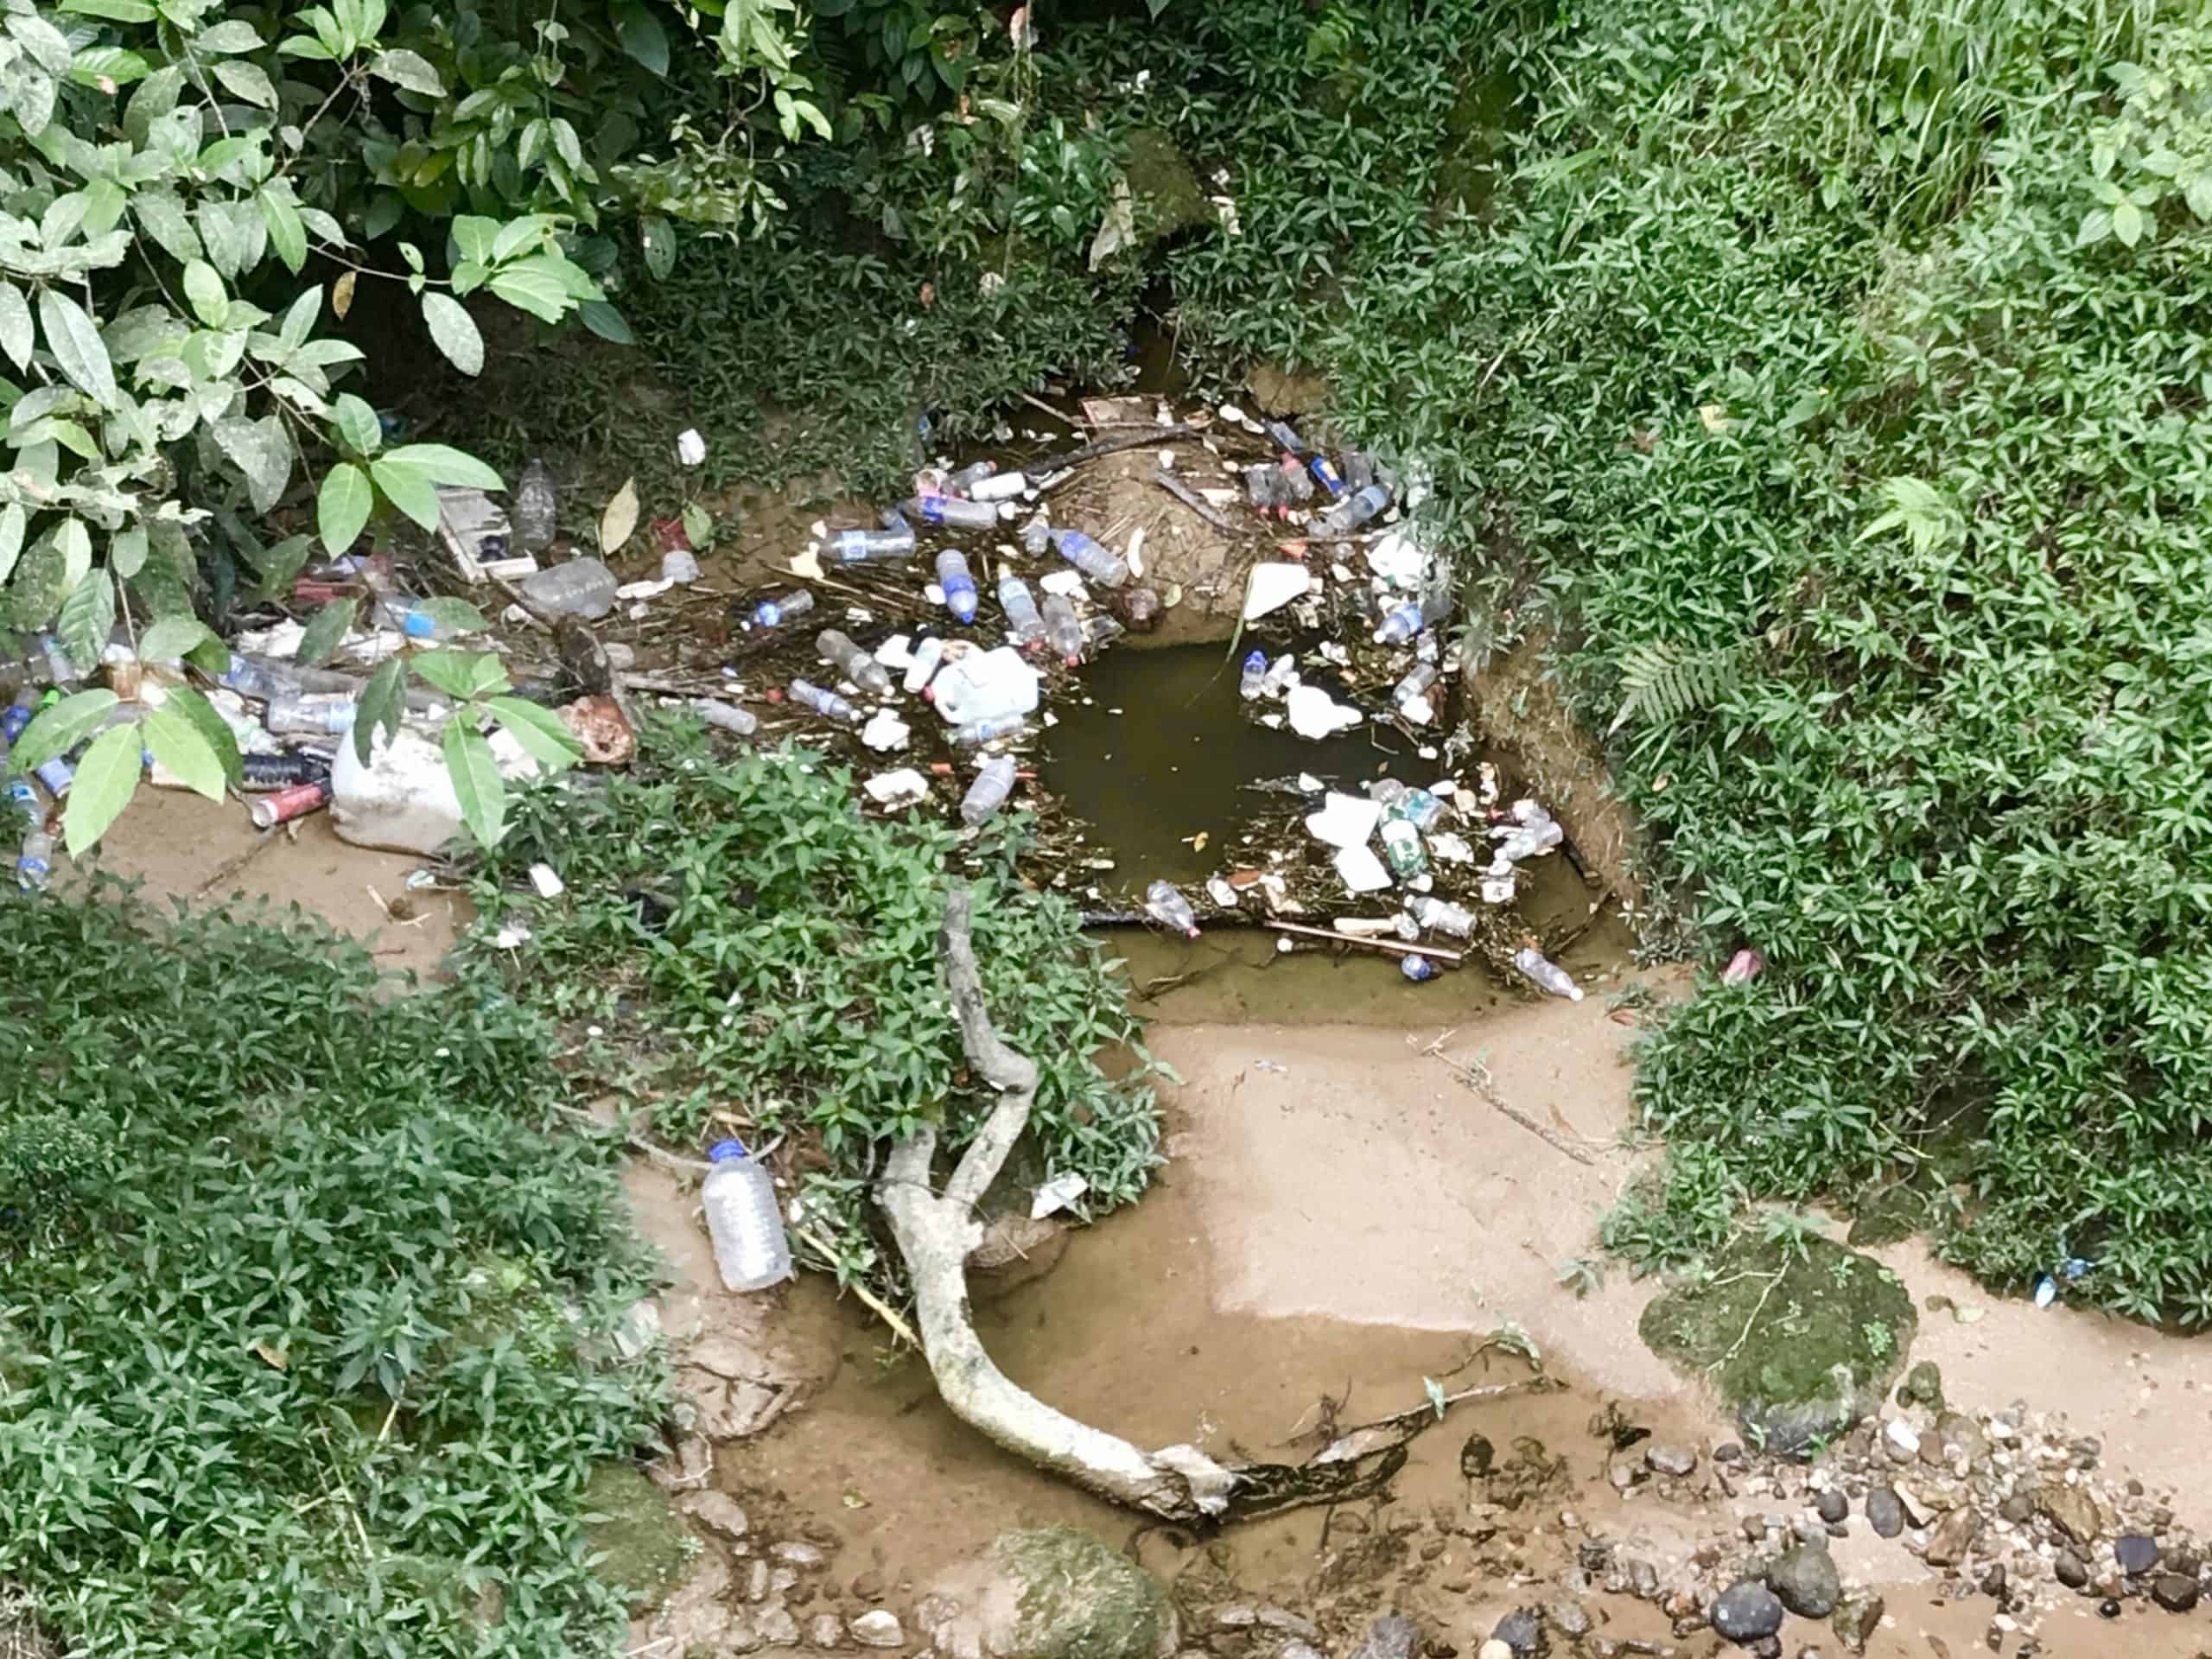 Piles of rubbish and plastic bottles in a stream